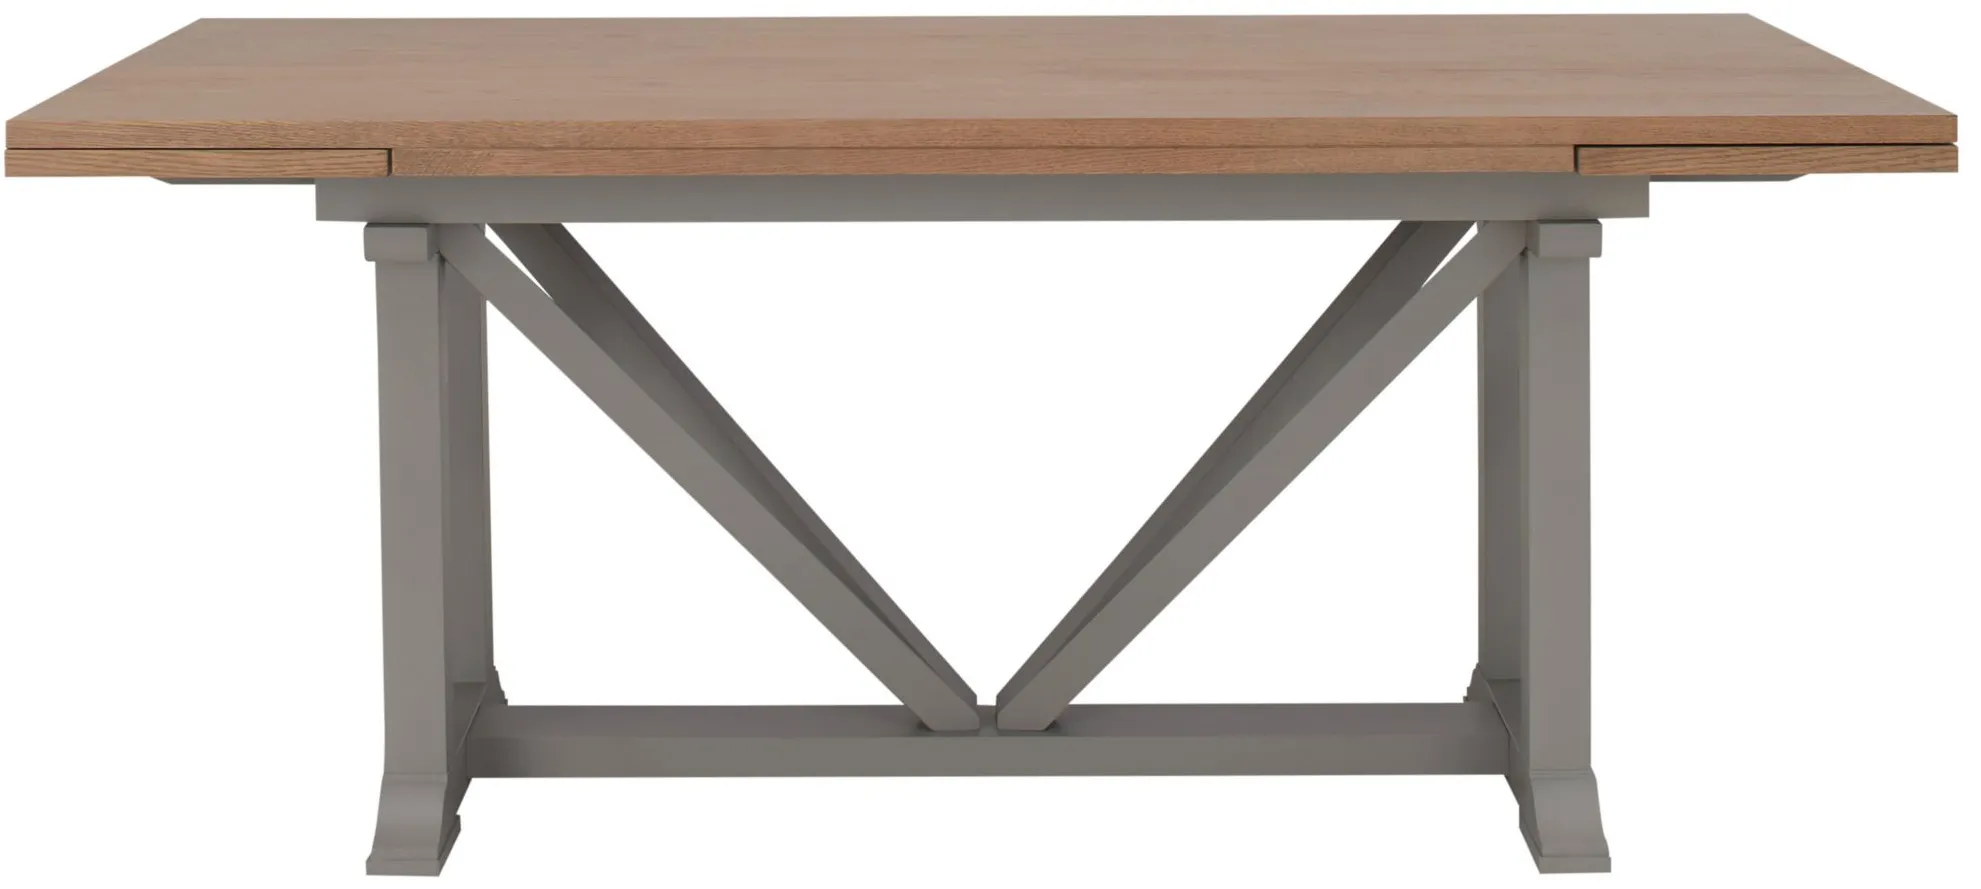 Crew Dining Table in Timeless Oak/Gray Skies by Riverside Furniture